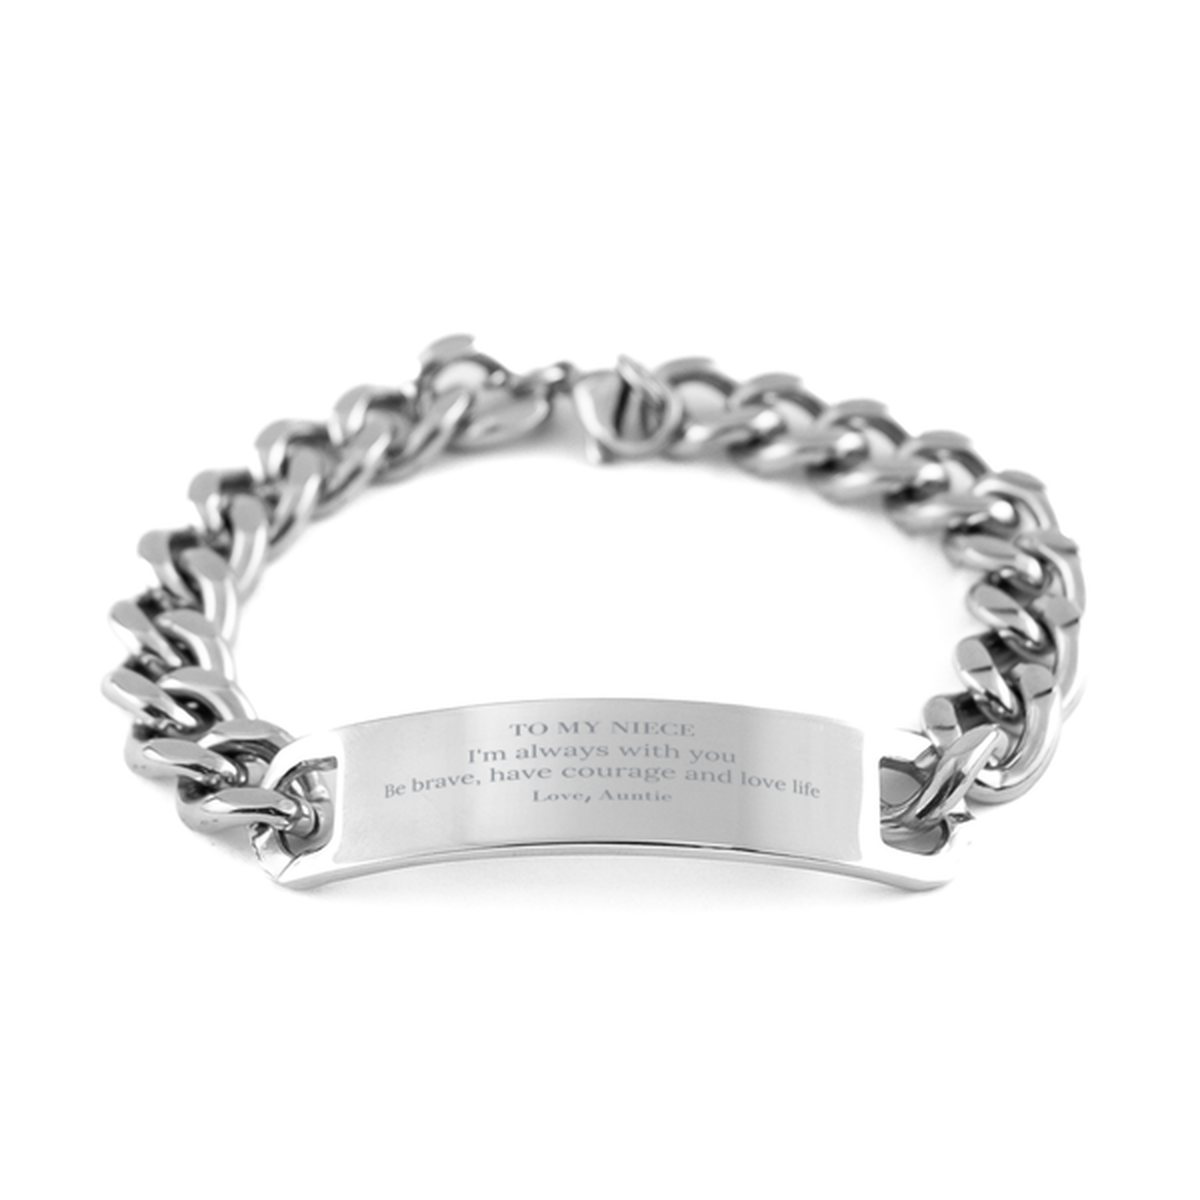 To My Niece Gifts from Auntie, Unique Cuban Chain Stainless Steel Bracelet Inspirational Christmas Birthday Graduation Gifts for Niece I'm always with you. Be brave, have courage and love life. Love, Auntie